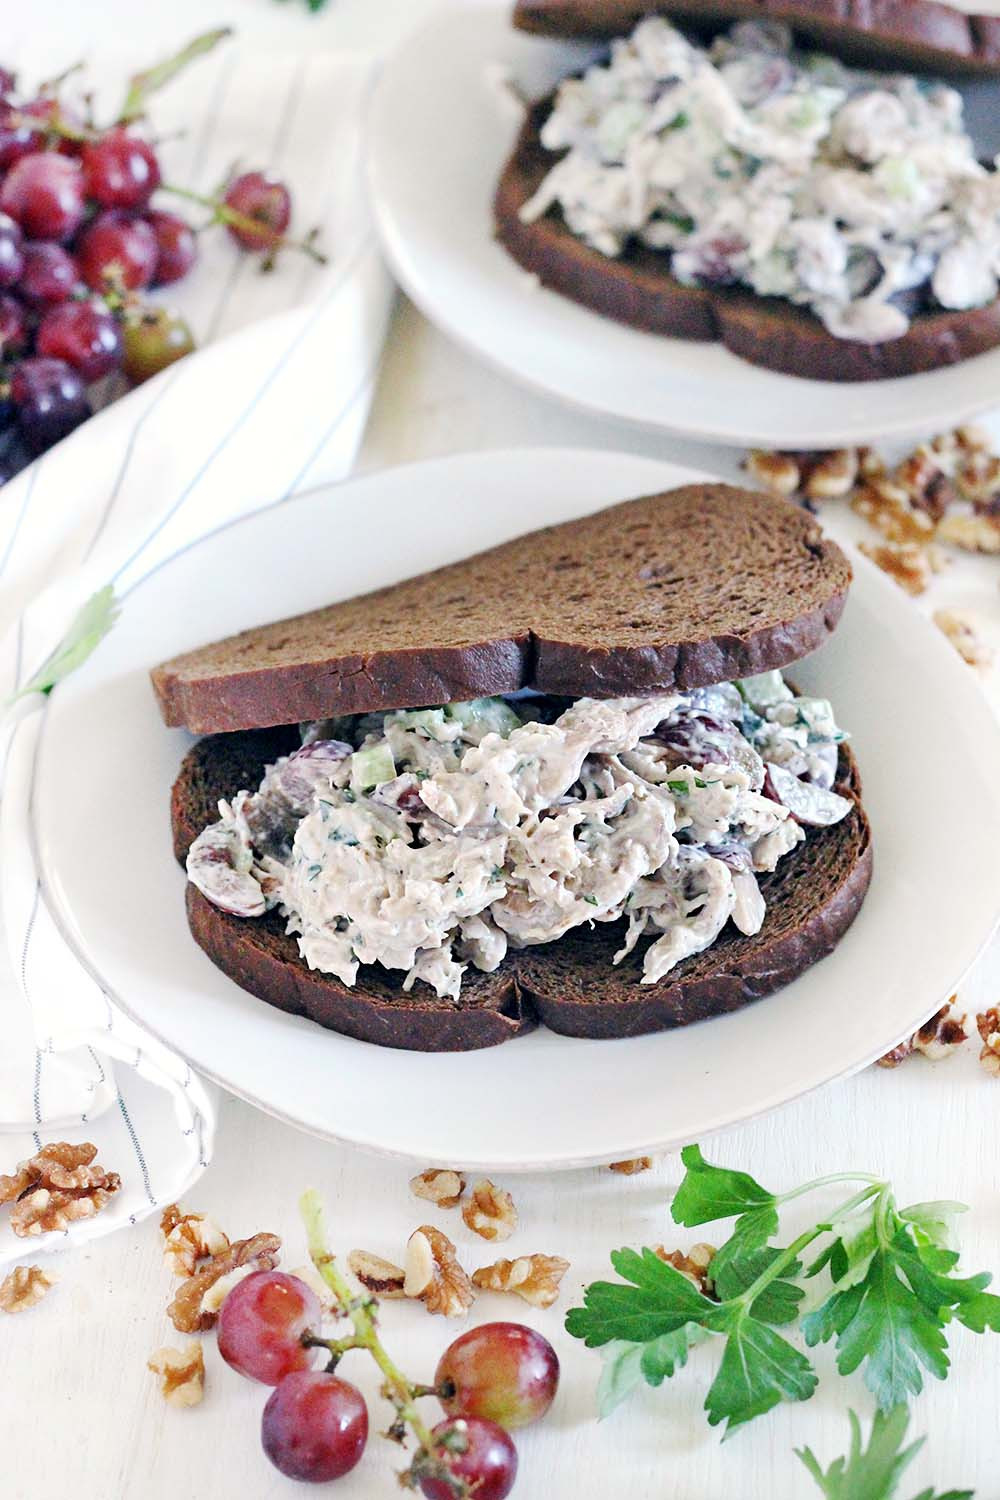 Chicken Salad With Grapes And Walnuts
 Awesome Chicken Salad with grapes and walnuts